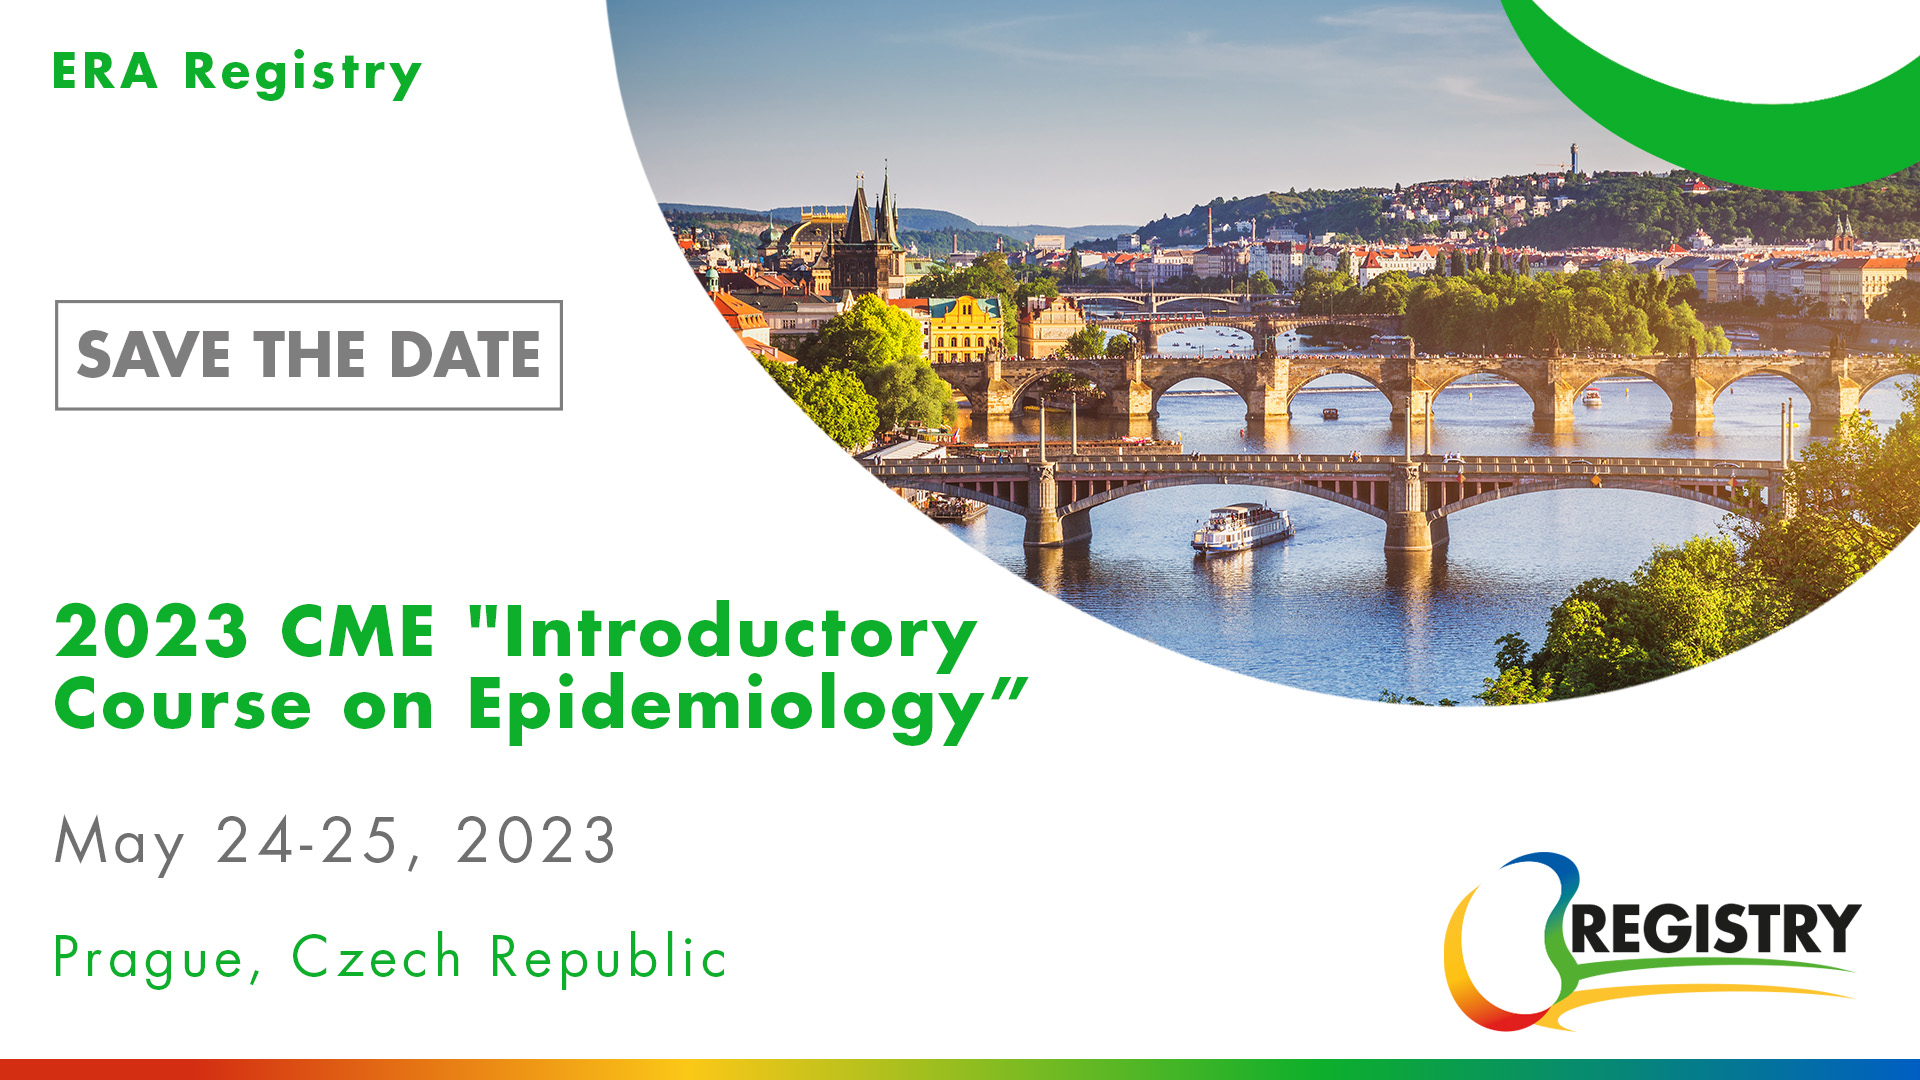 2023 CME “Introductory Course on Epidemiology”